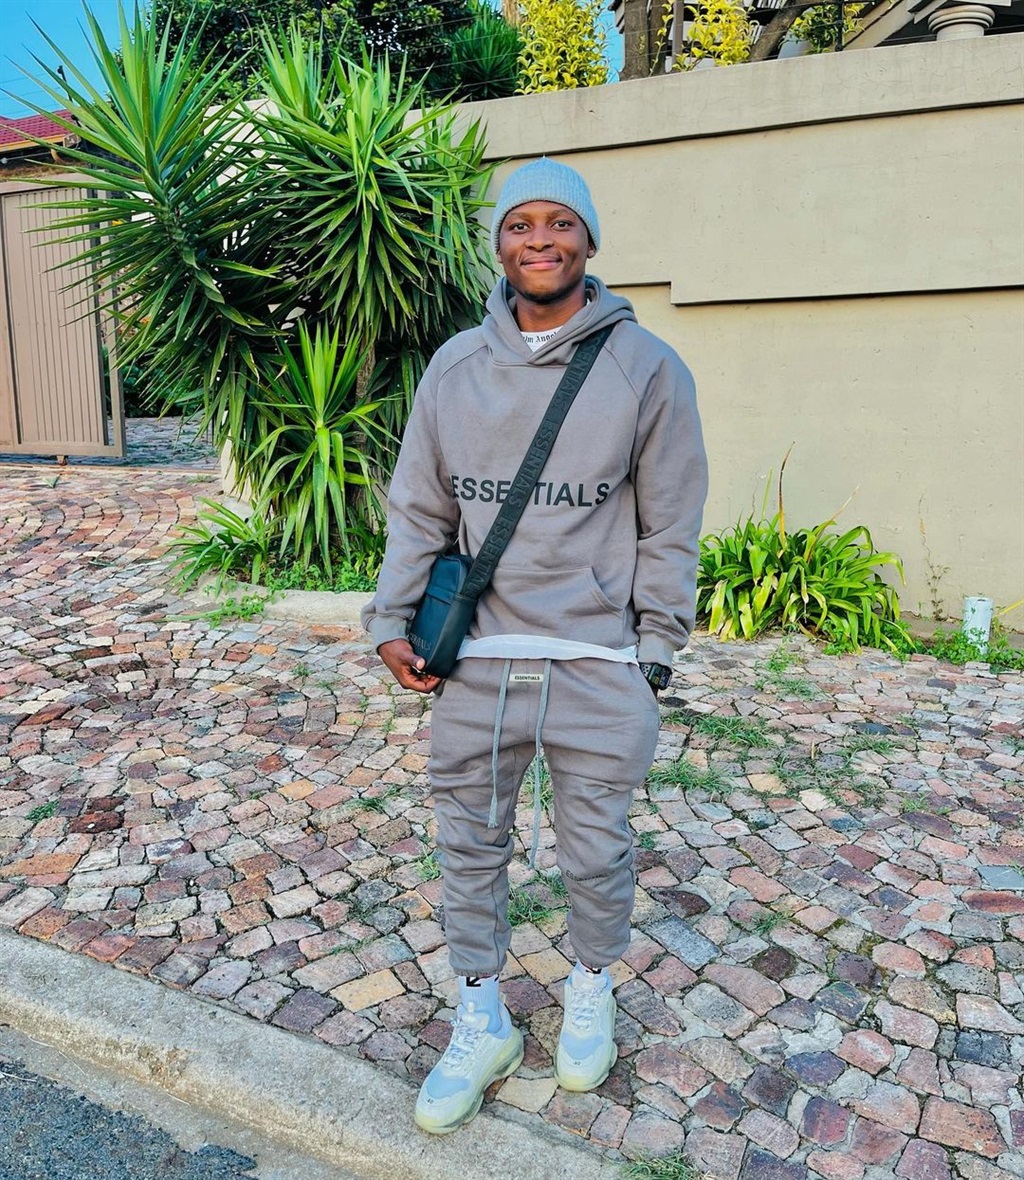 Orlando Pirates' stylish defender channels Kanye West and Fear of God Essentials founder Jerry Lorenzo with his latest outfit.